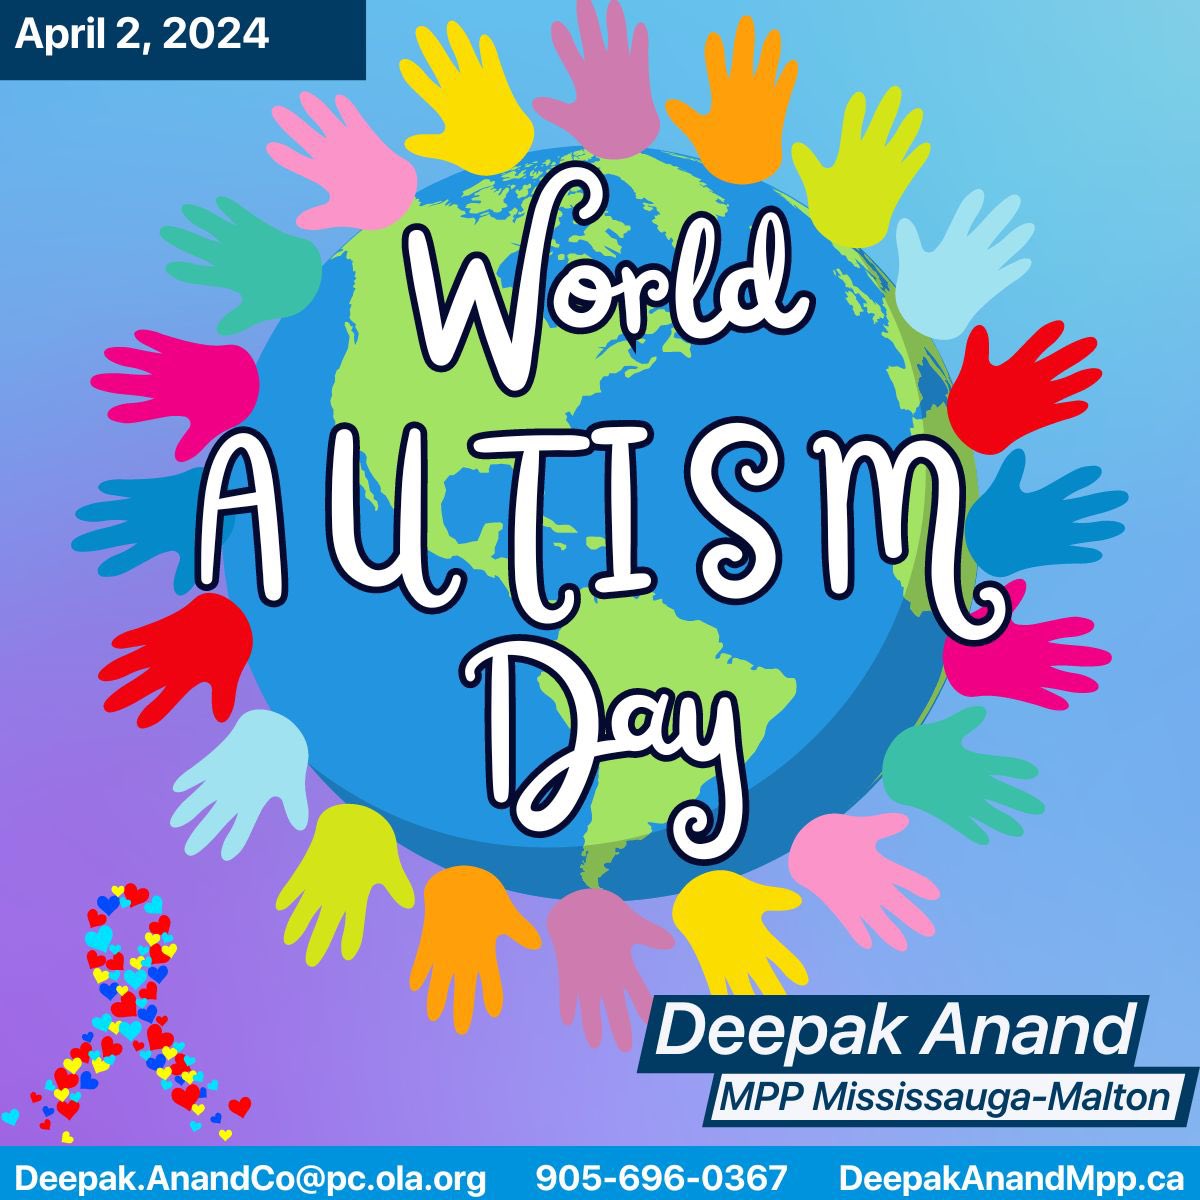 #Dyk approximately 135,000 Ontarians are on the autism spectrum? #Autism can take many forms and impact people in a variety of ways. On #AutismAwarenessDay let’s acknowledge the challenges faced by & celebrate the contributions of those living with Autism. autismontario.com